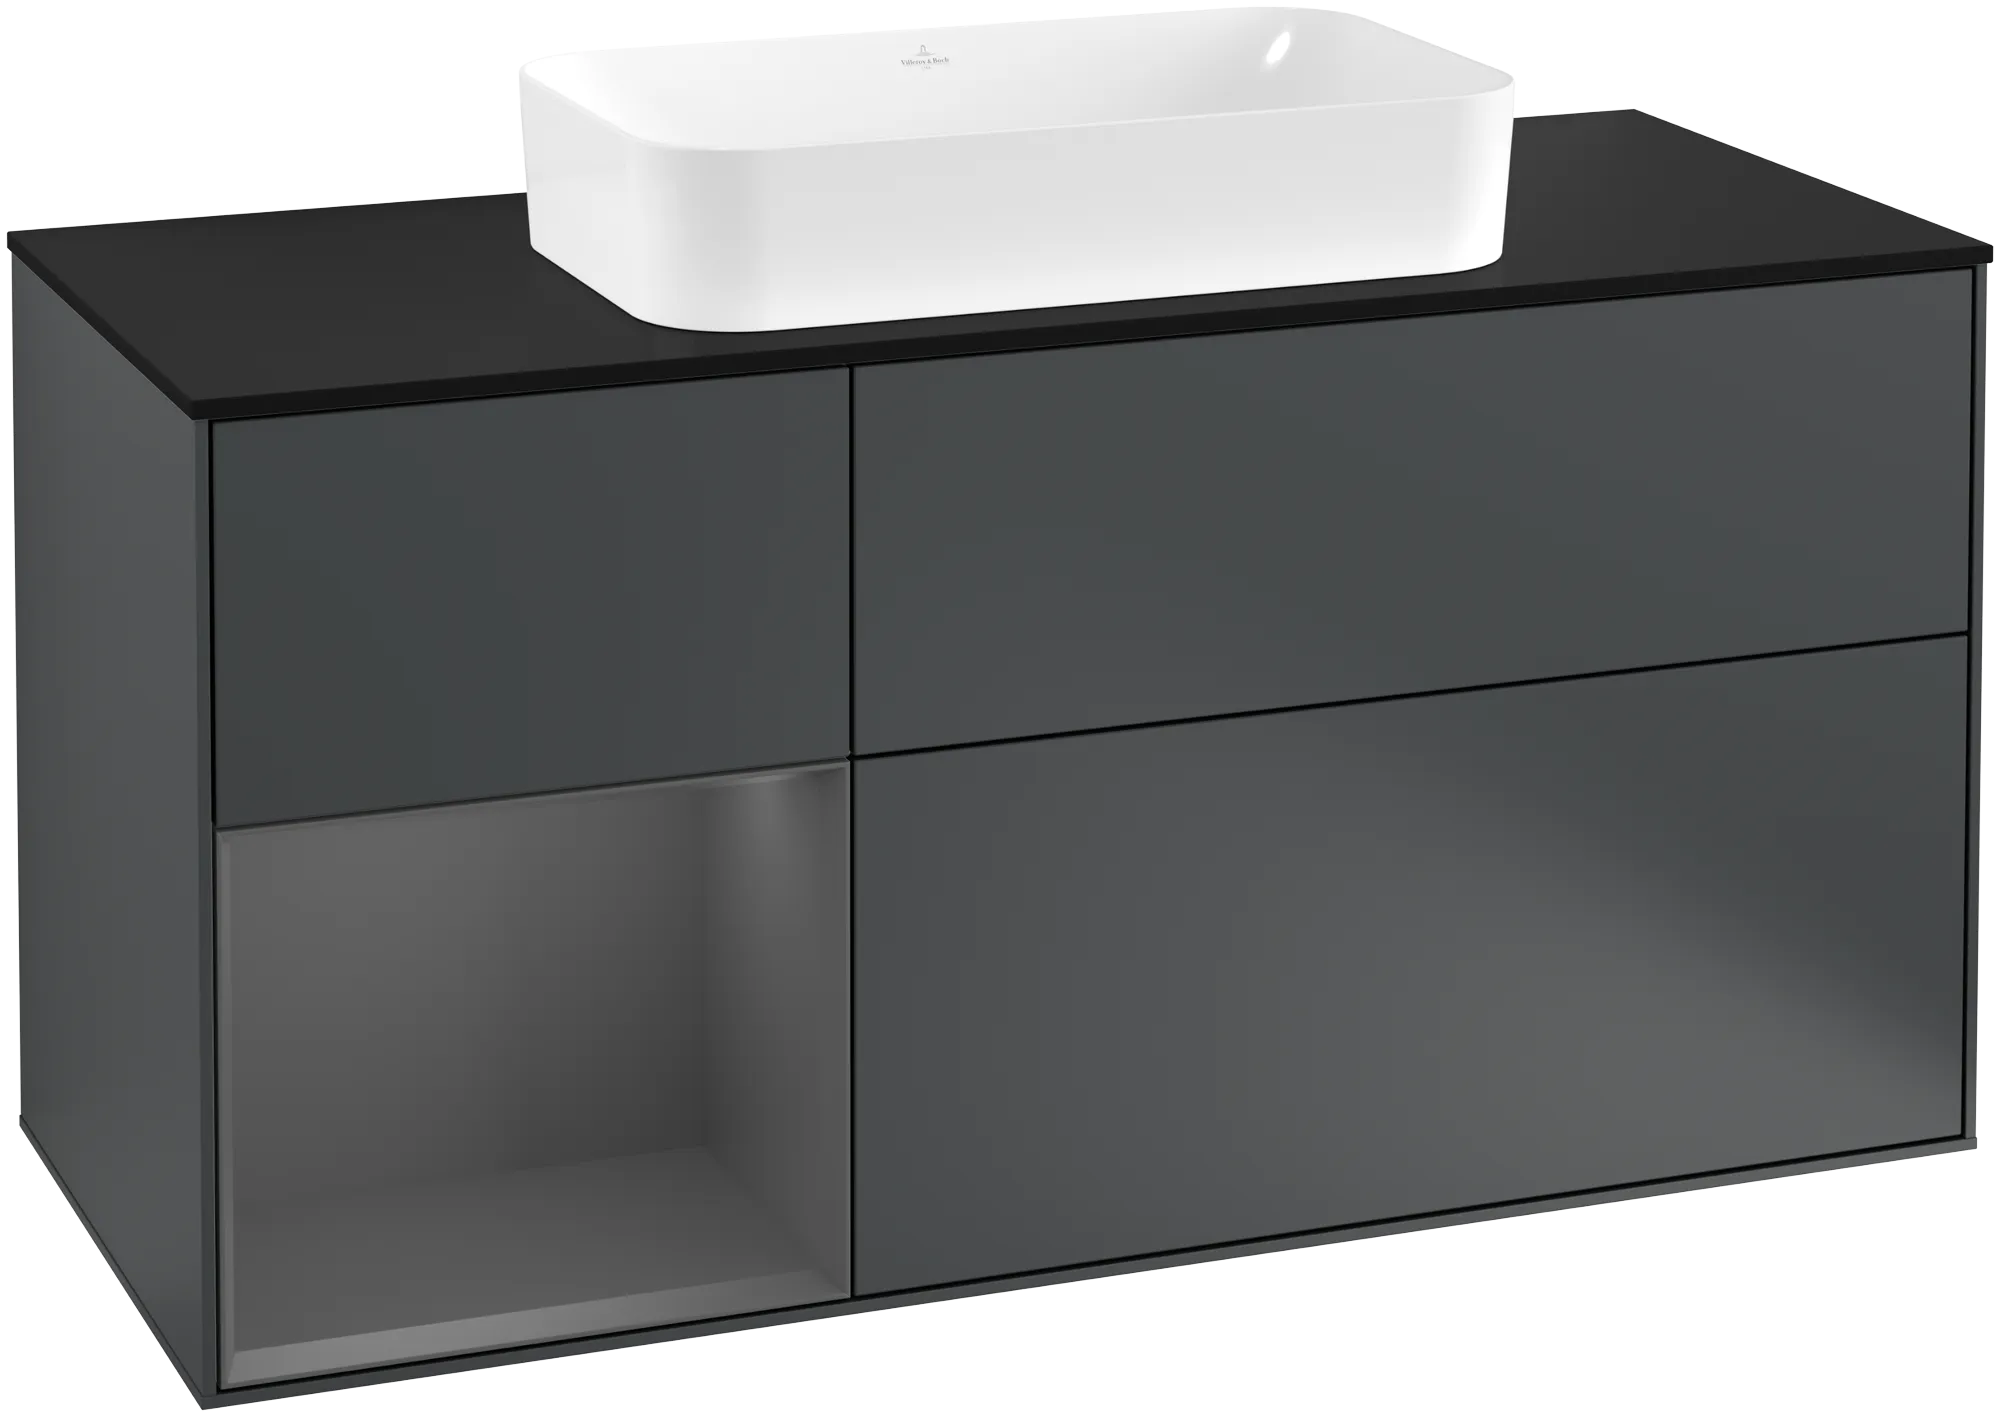 Picture of VILLEROY BOCH Finion Vanity unit, with lighting, 3 pull-out compartments, 1200 x 603 x 501 mm, Midnight Blue Matt Lacquer / Anthracite Matt Lacquer / Glass Black Matt #G292GKHG